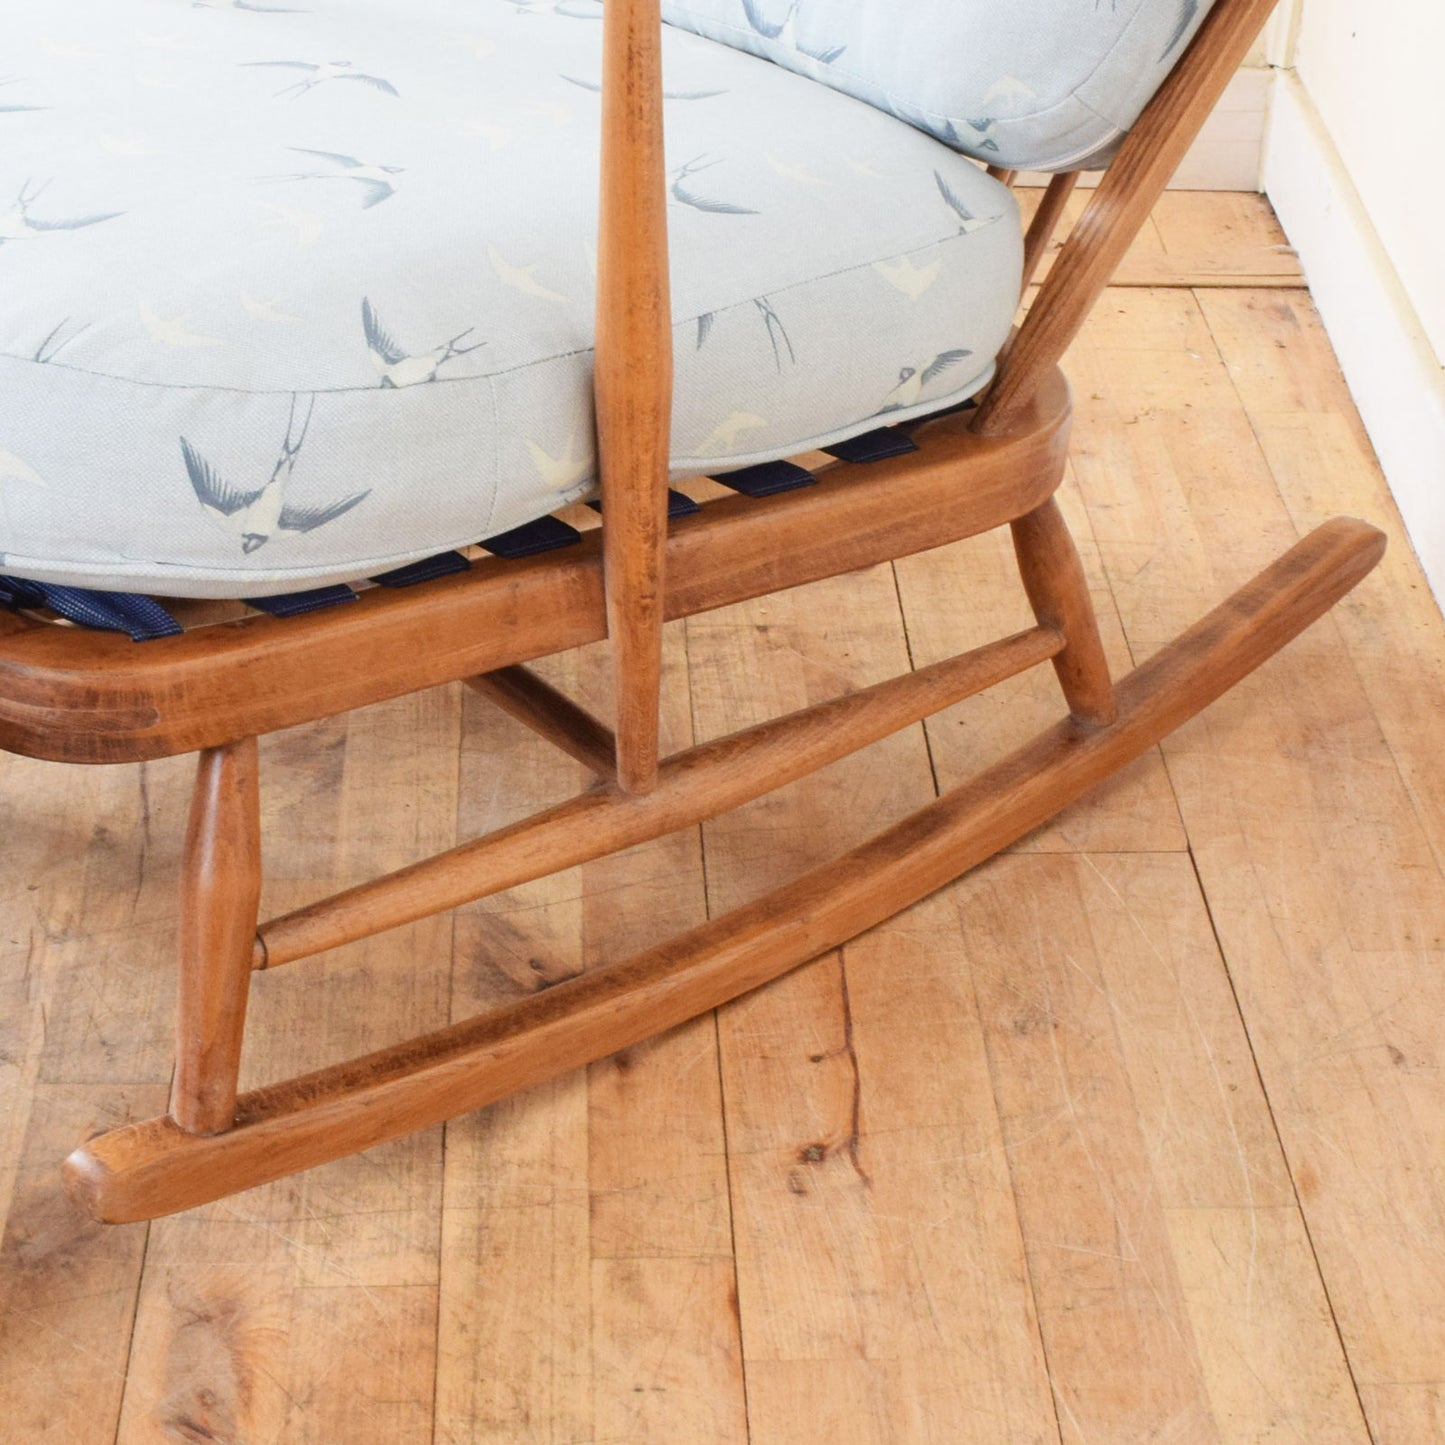 Ercol Rocking Chair and Foot Stool